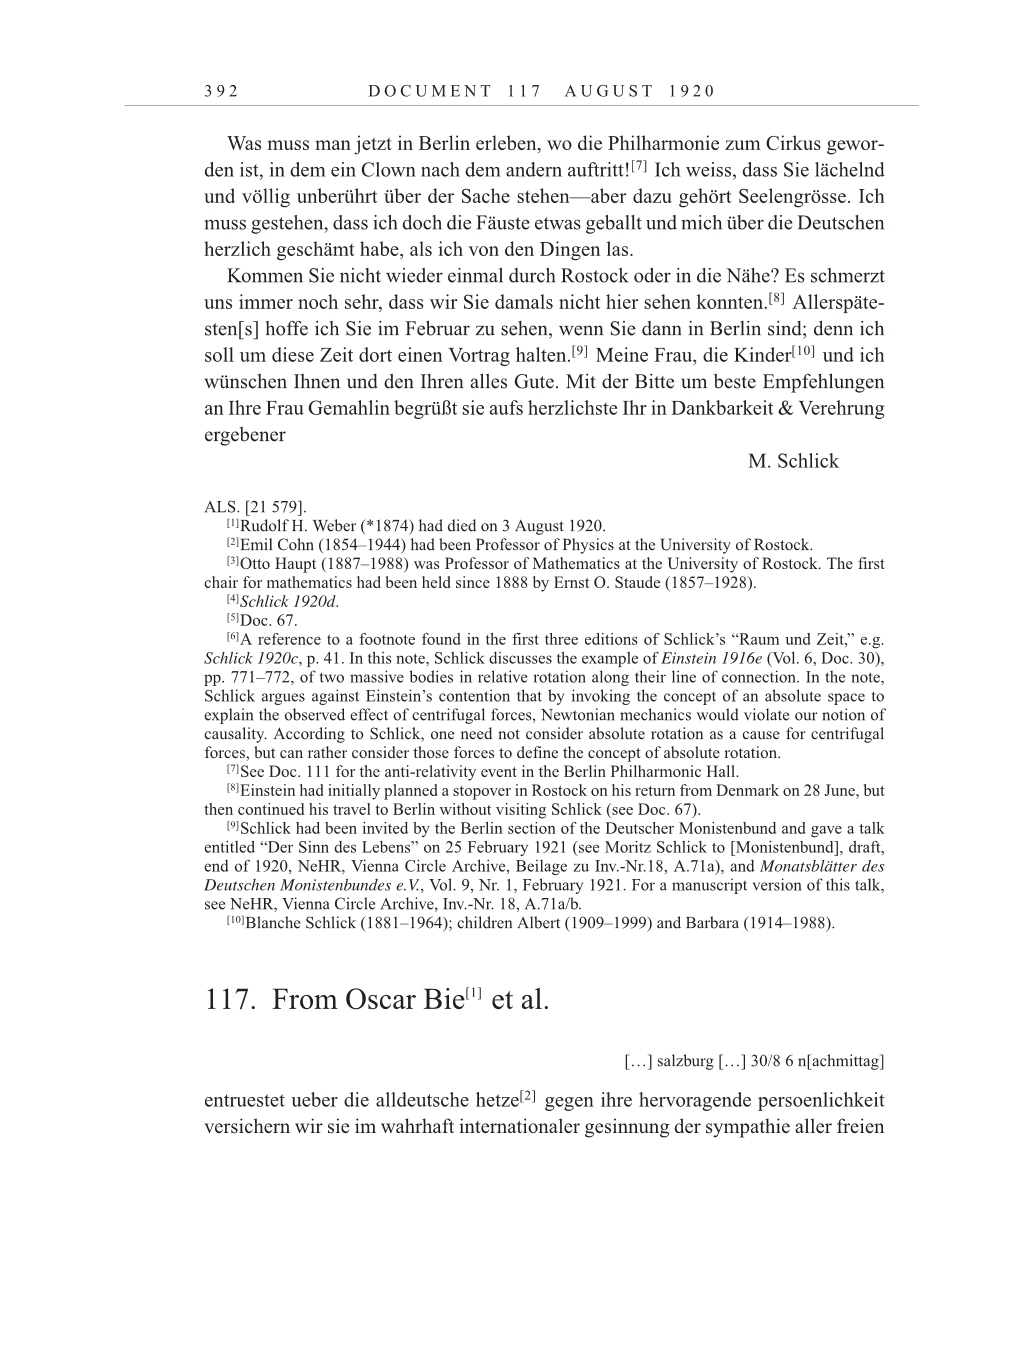 Volume 10: The Berlin Years: Correspondence May-December 1920 / Supplementary Correspondence 1909-1920 page 392